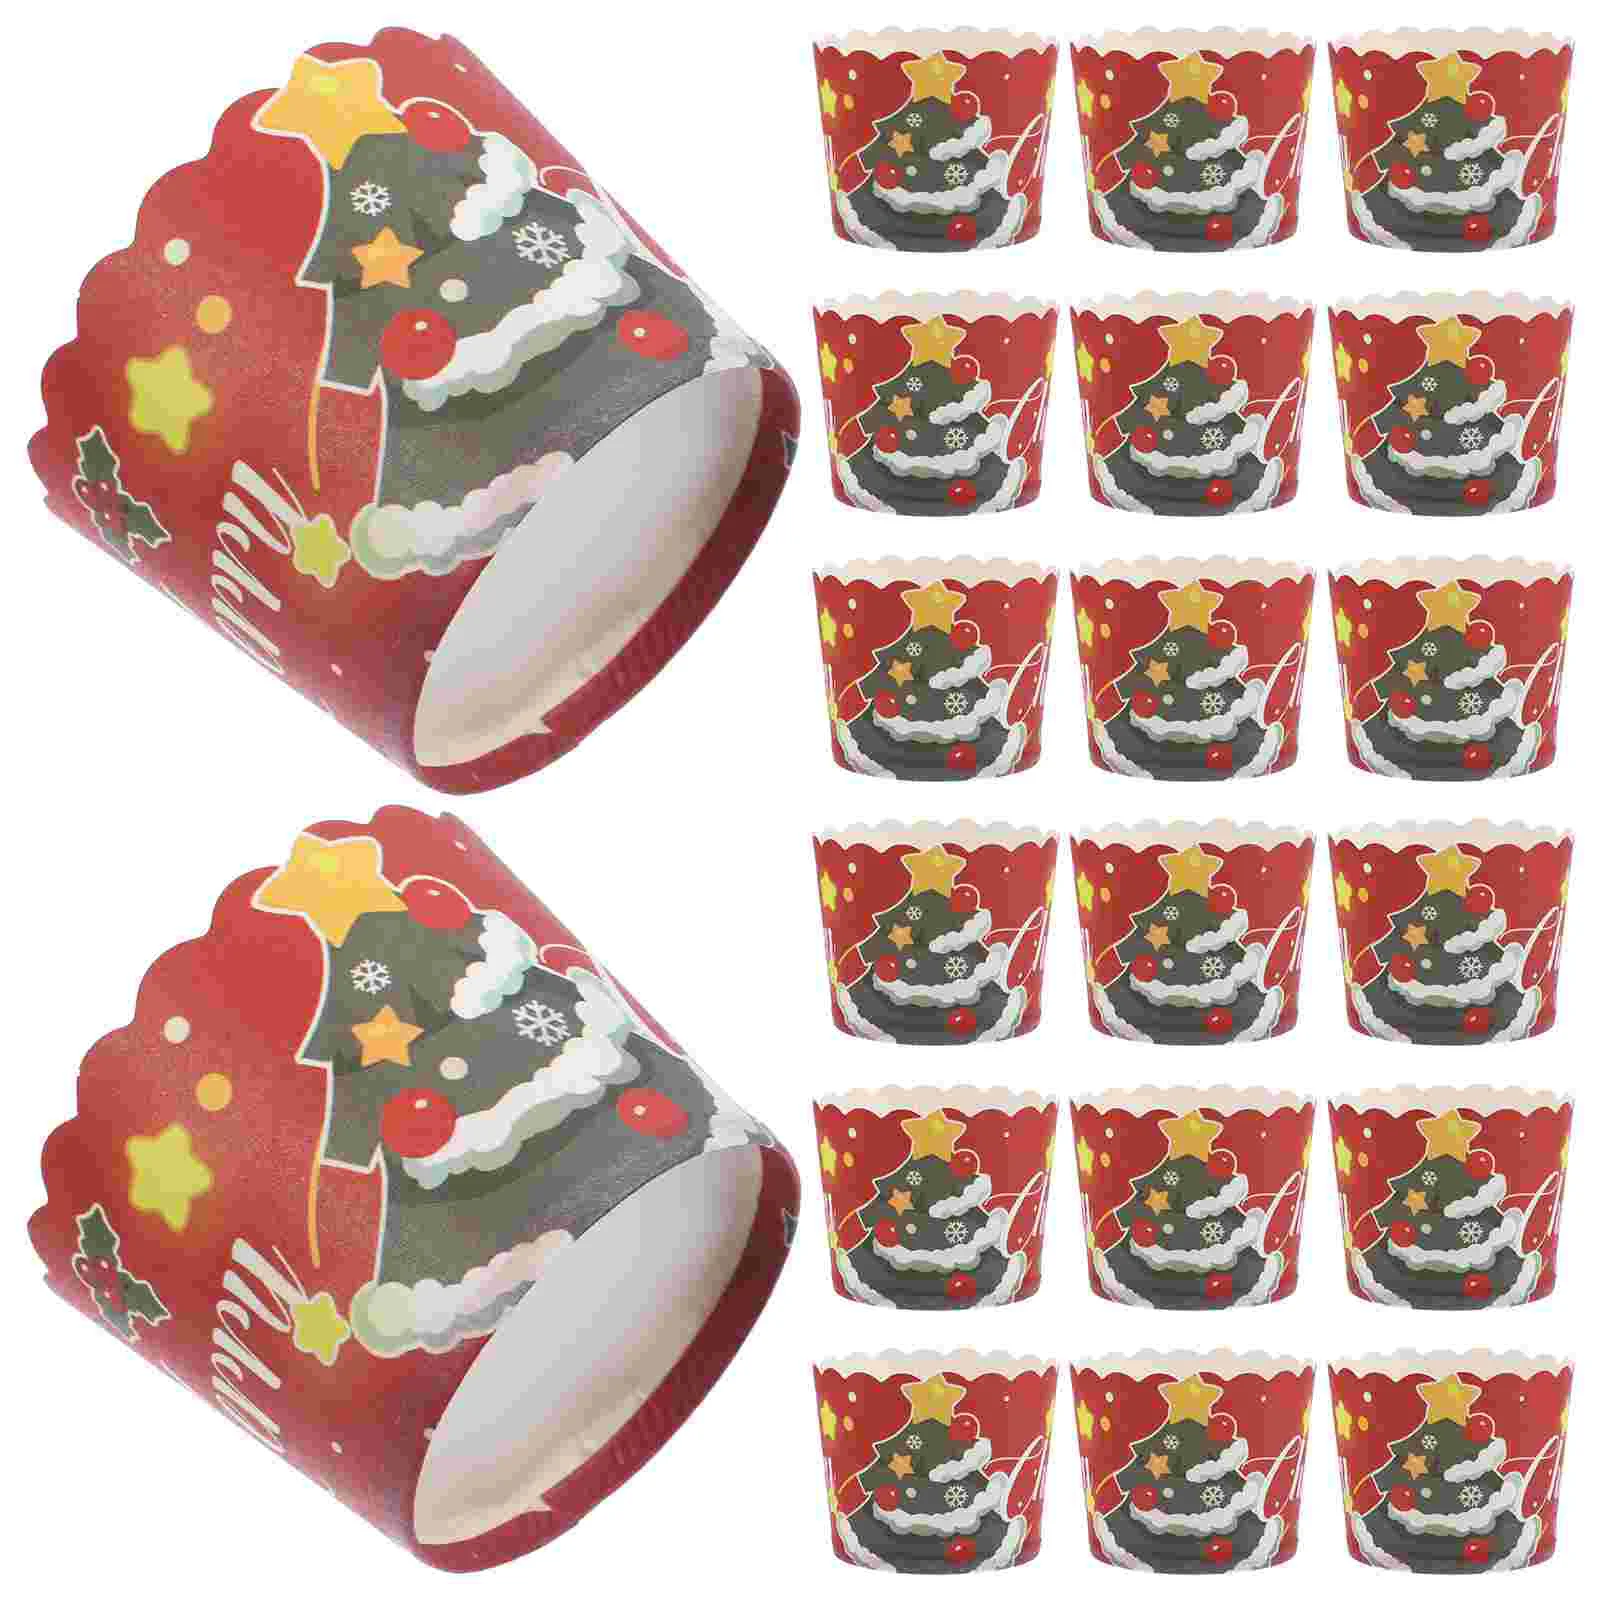 

50Pcs Christmas Cupcake Wrappers Muffin Wrappers Liners Baking Cups Holiday Festival Party Supplies